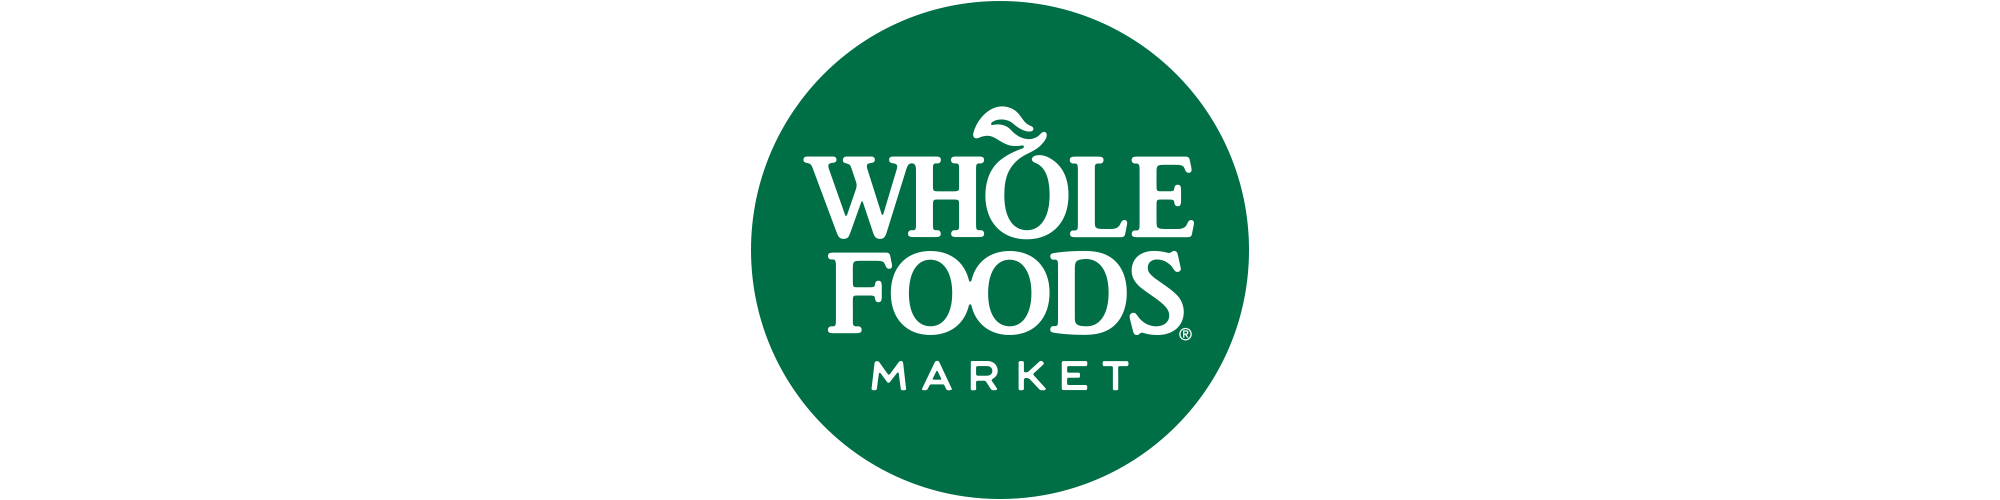 Whole Food's logo uses green color psychology